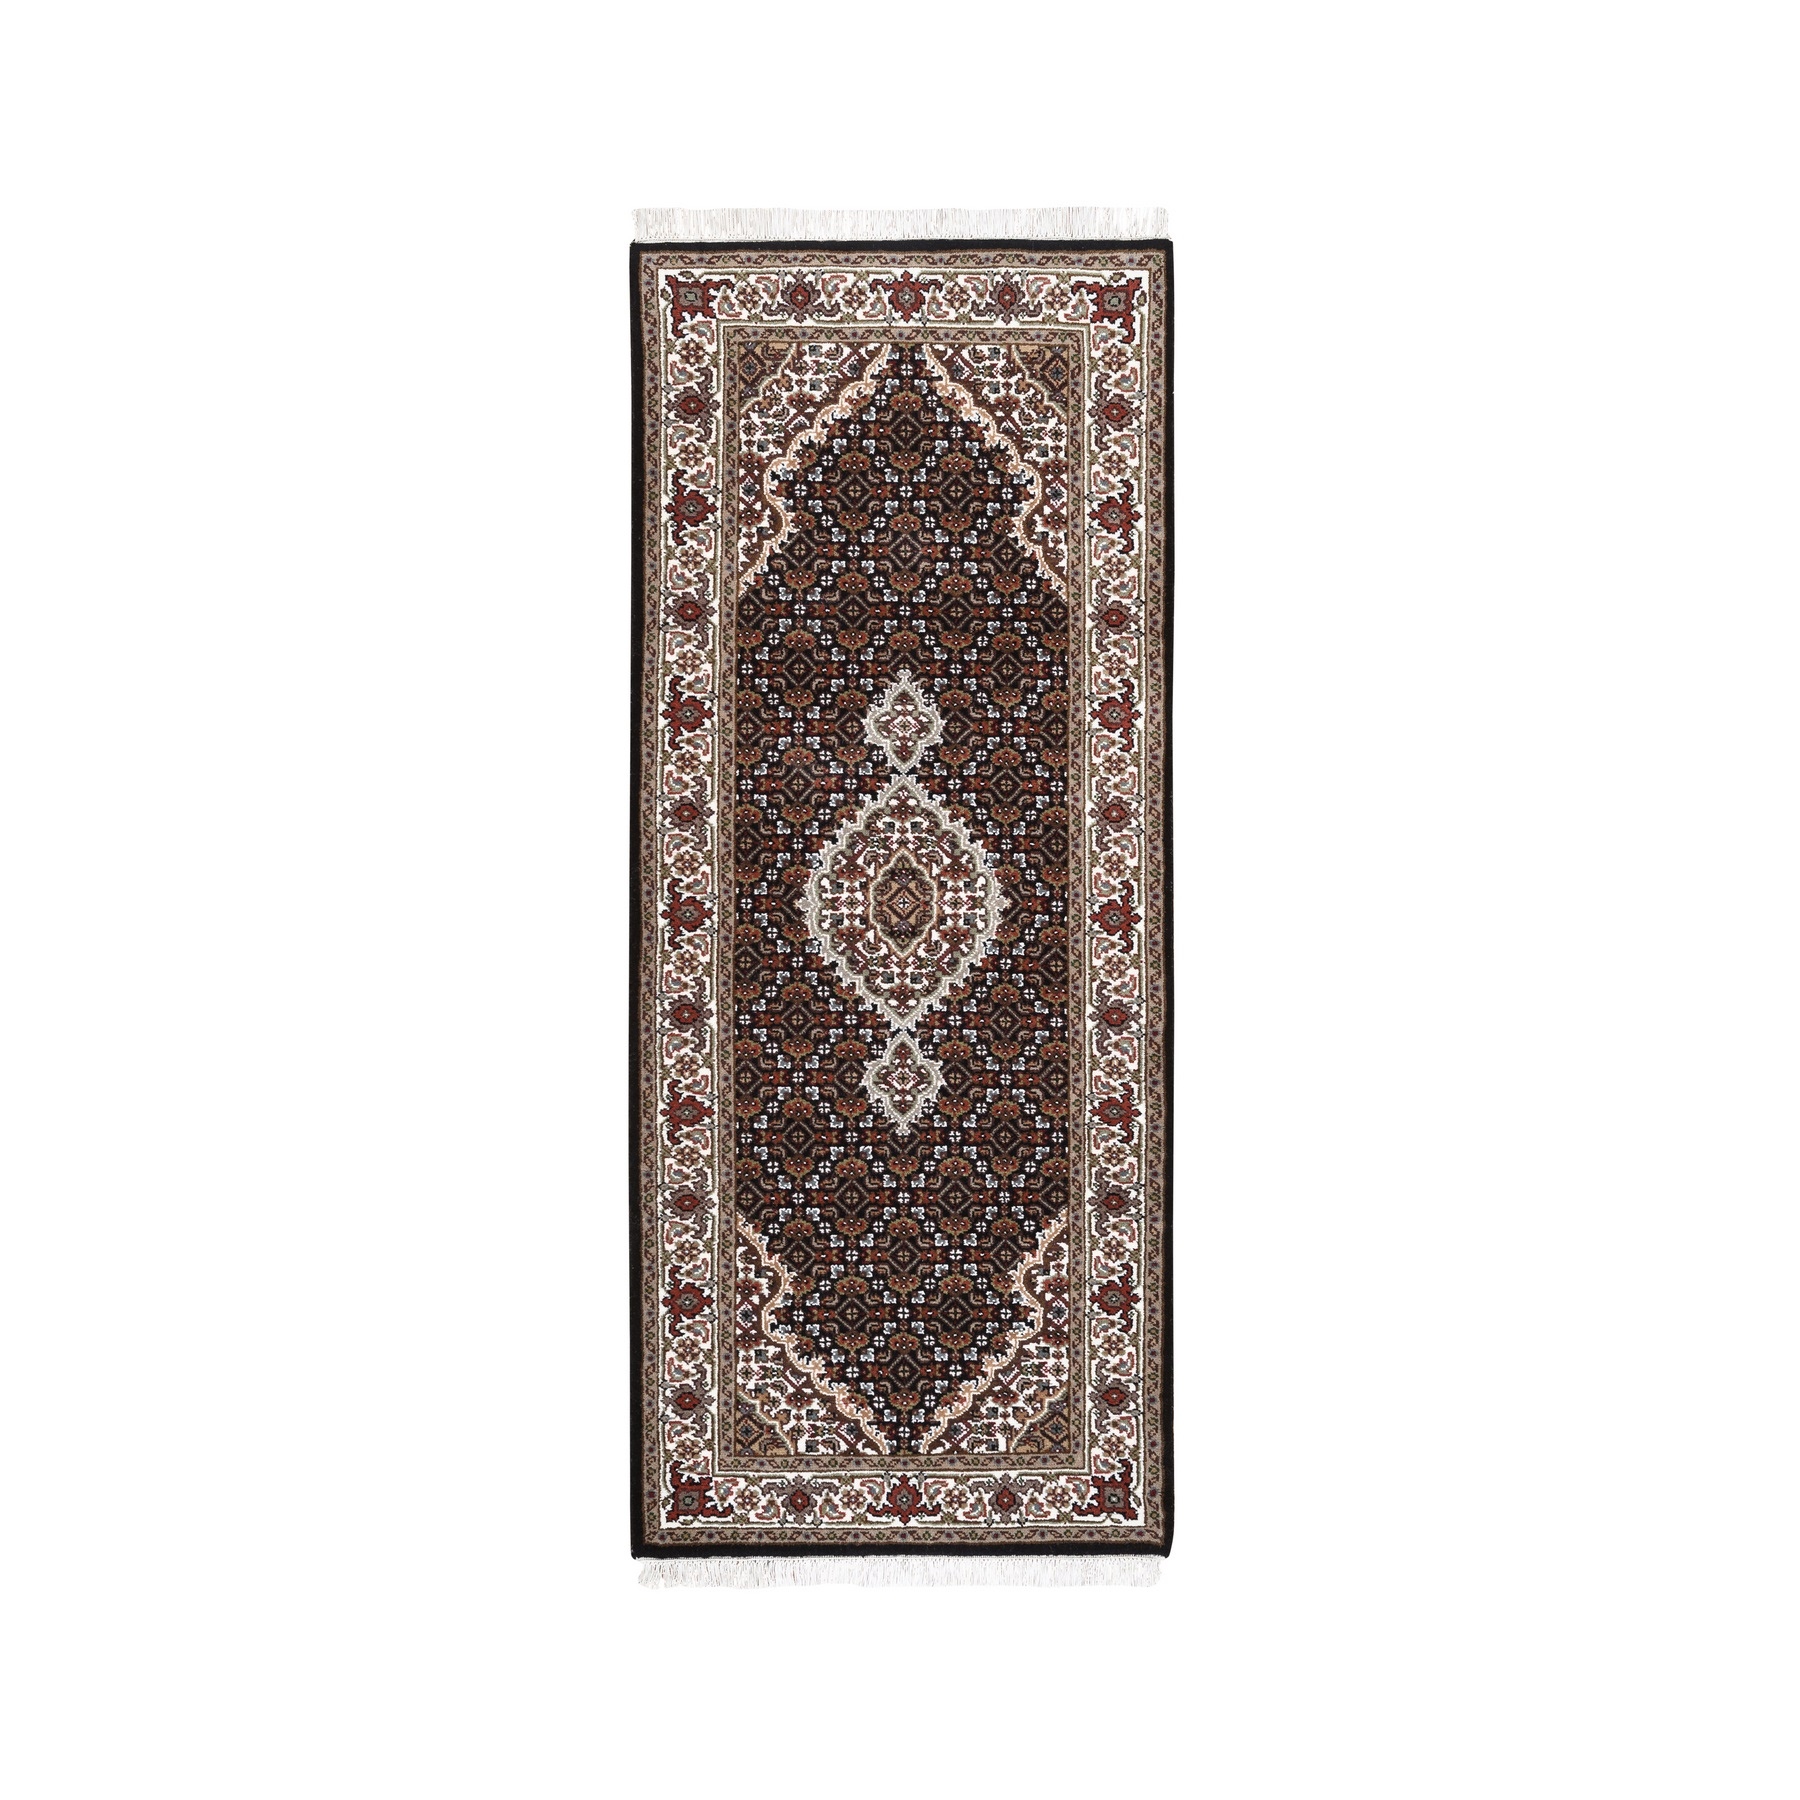 Pirniakan Collection Hand Knotted Black Rug No: 1125192